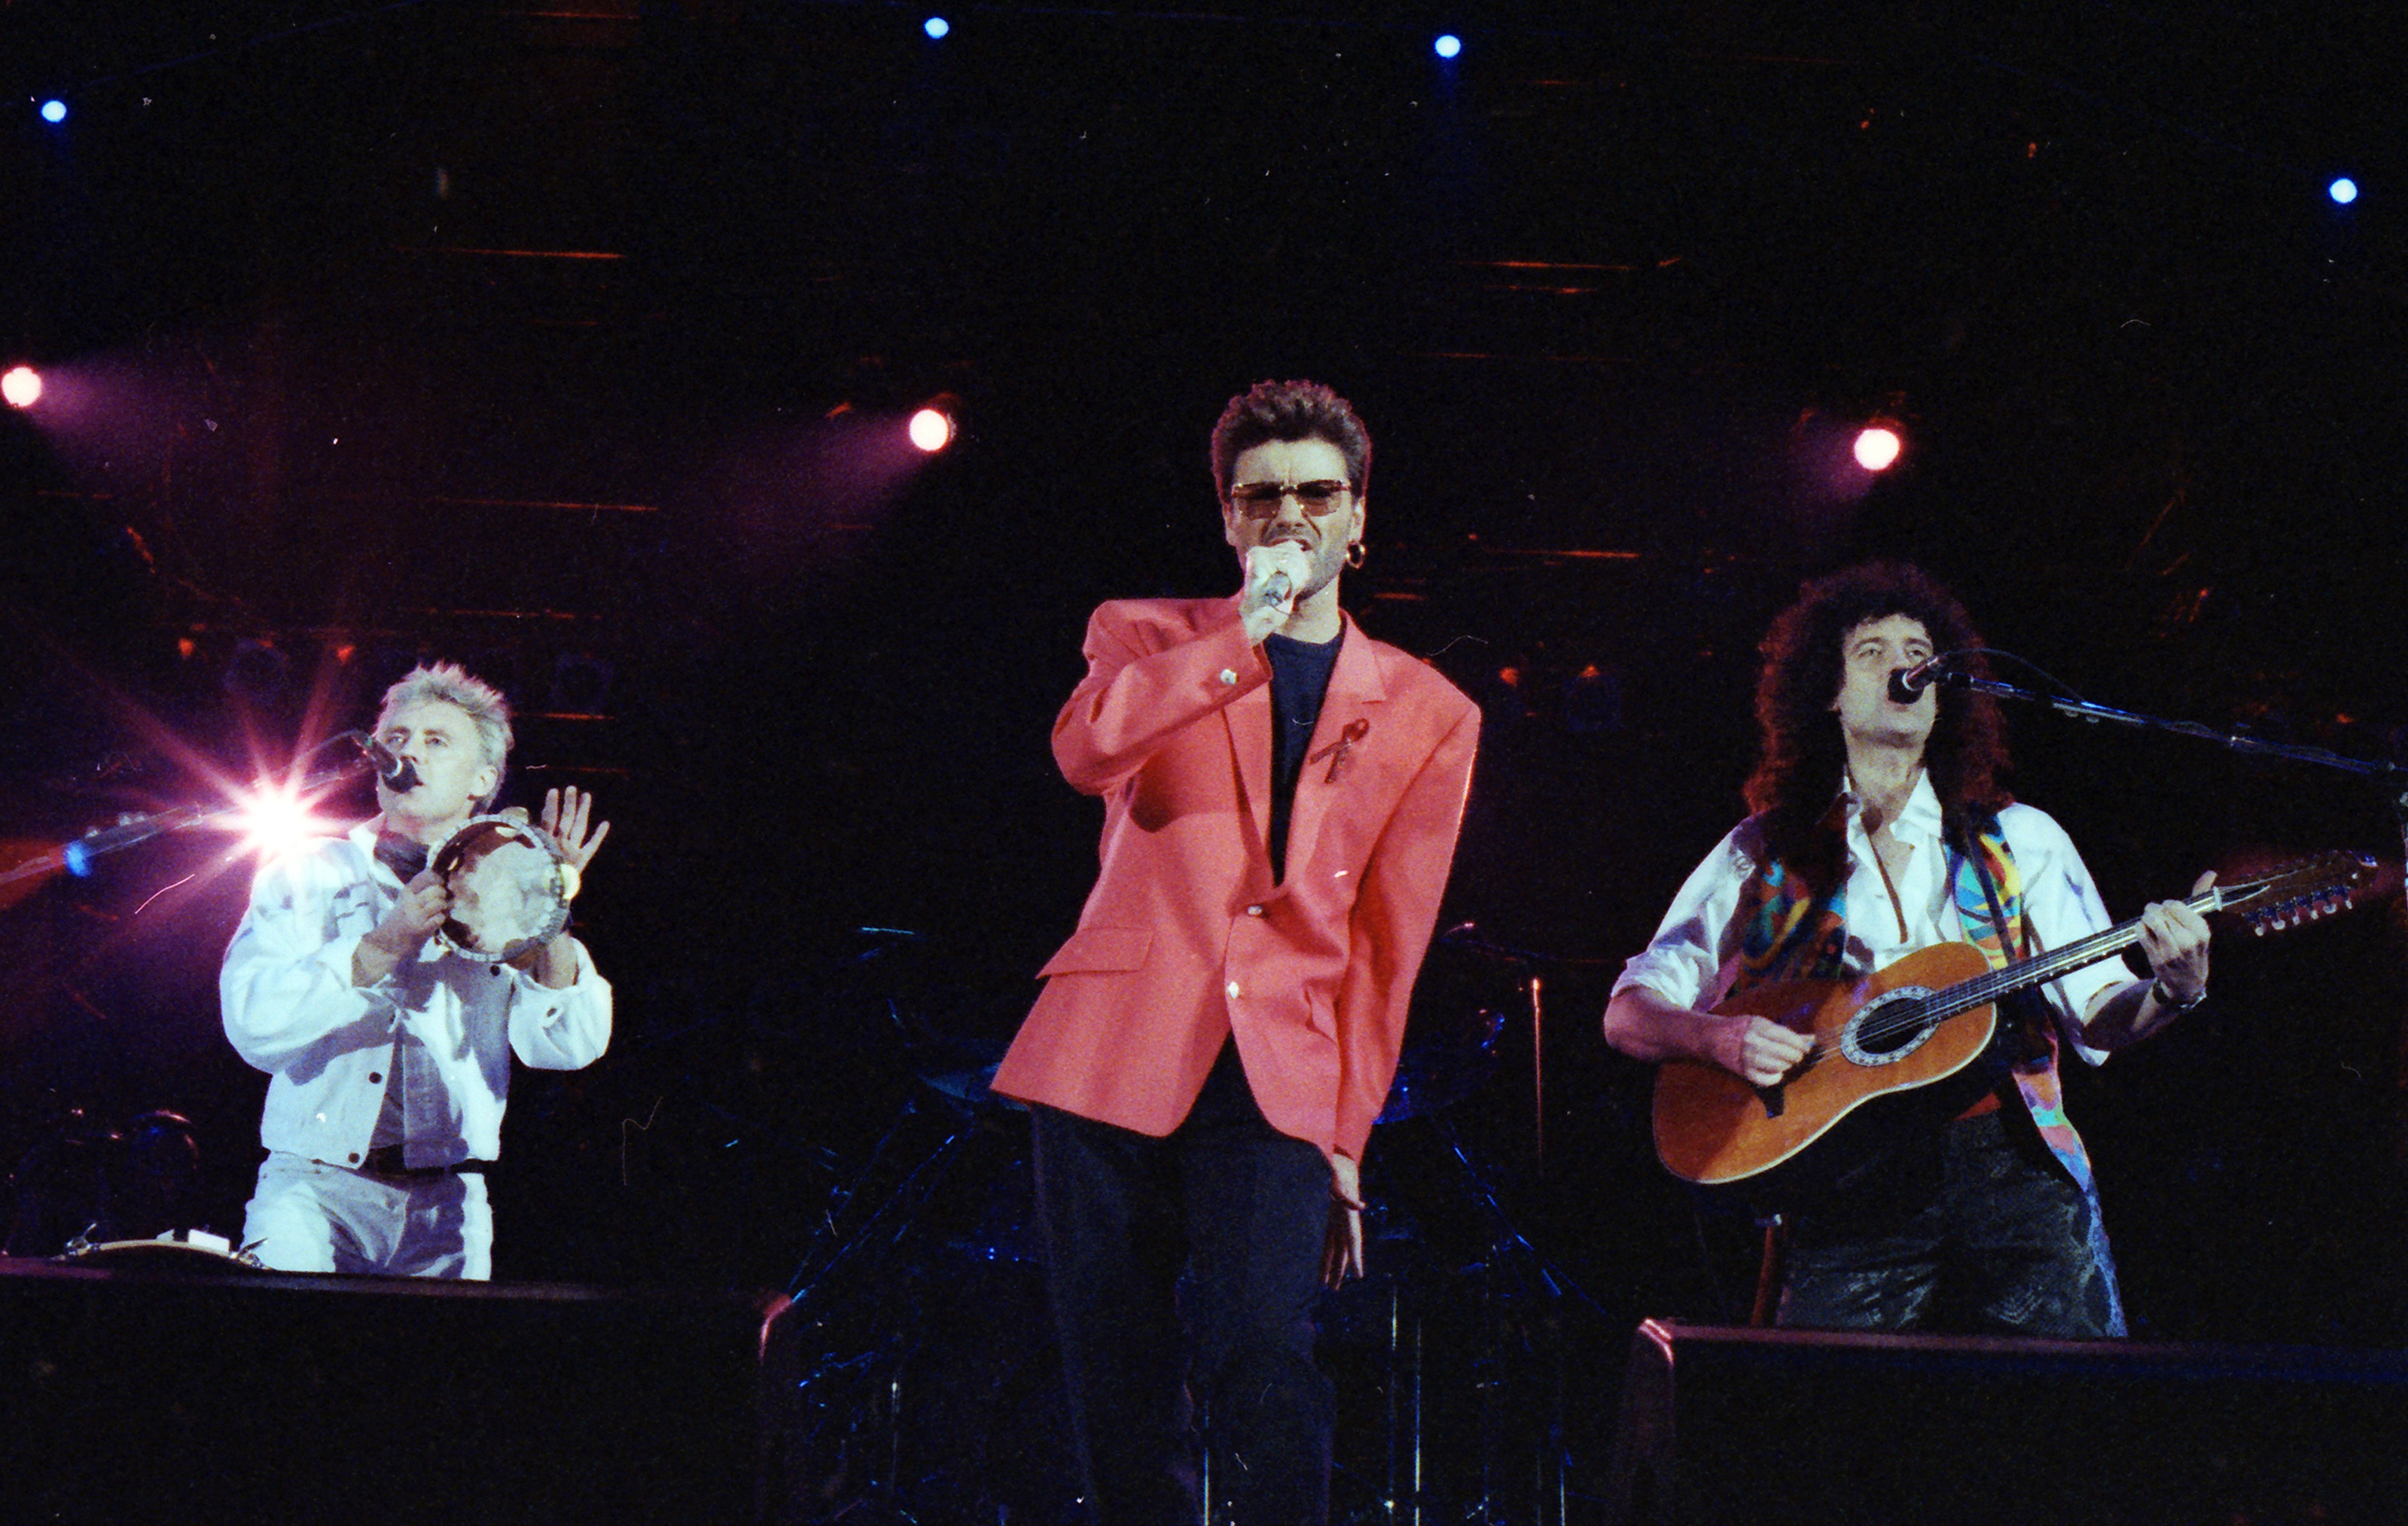 Singer George Michael performs with Queen at the Freddie Mercury Tribute Concert for AIDS Awareness, at Wembley Stadium, in London